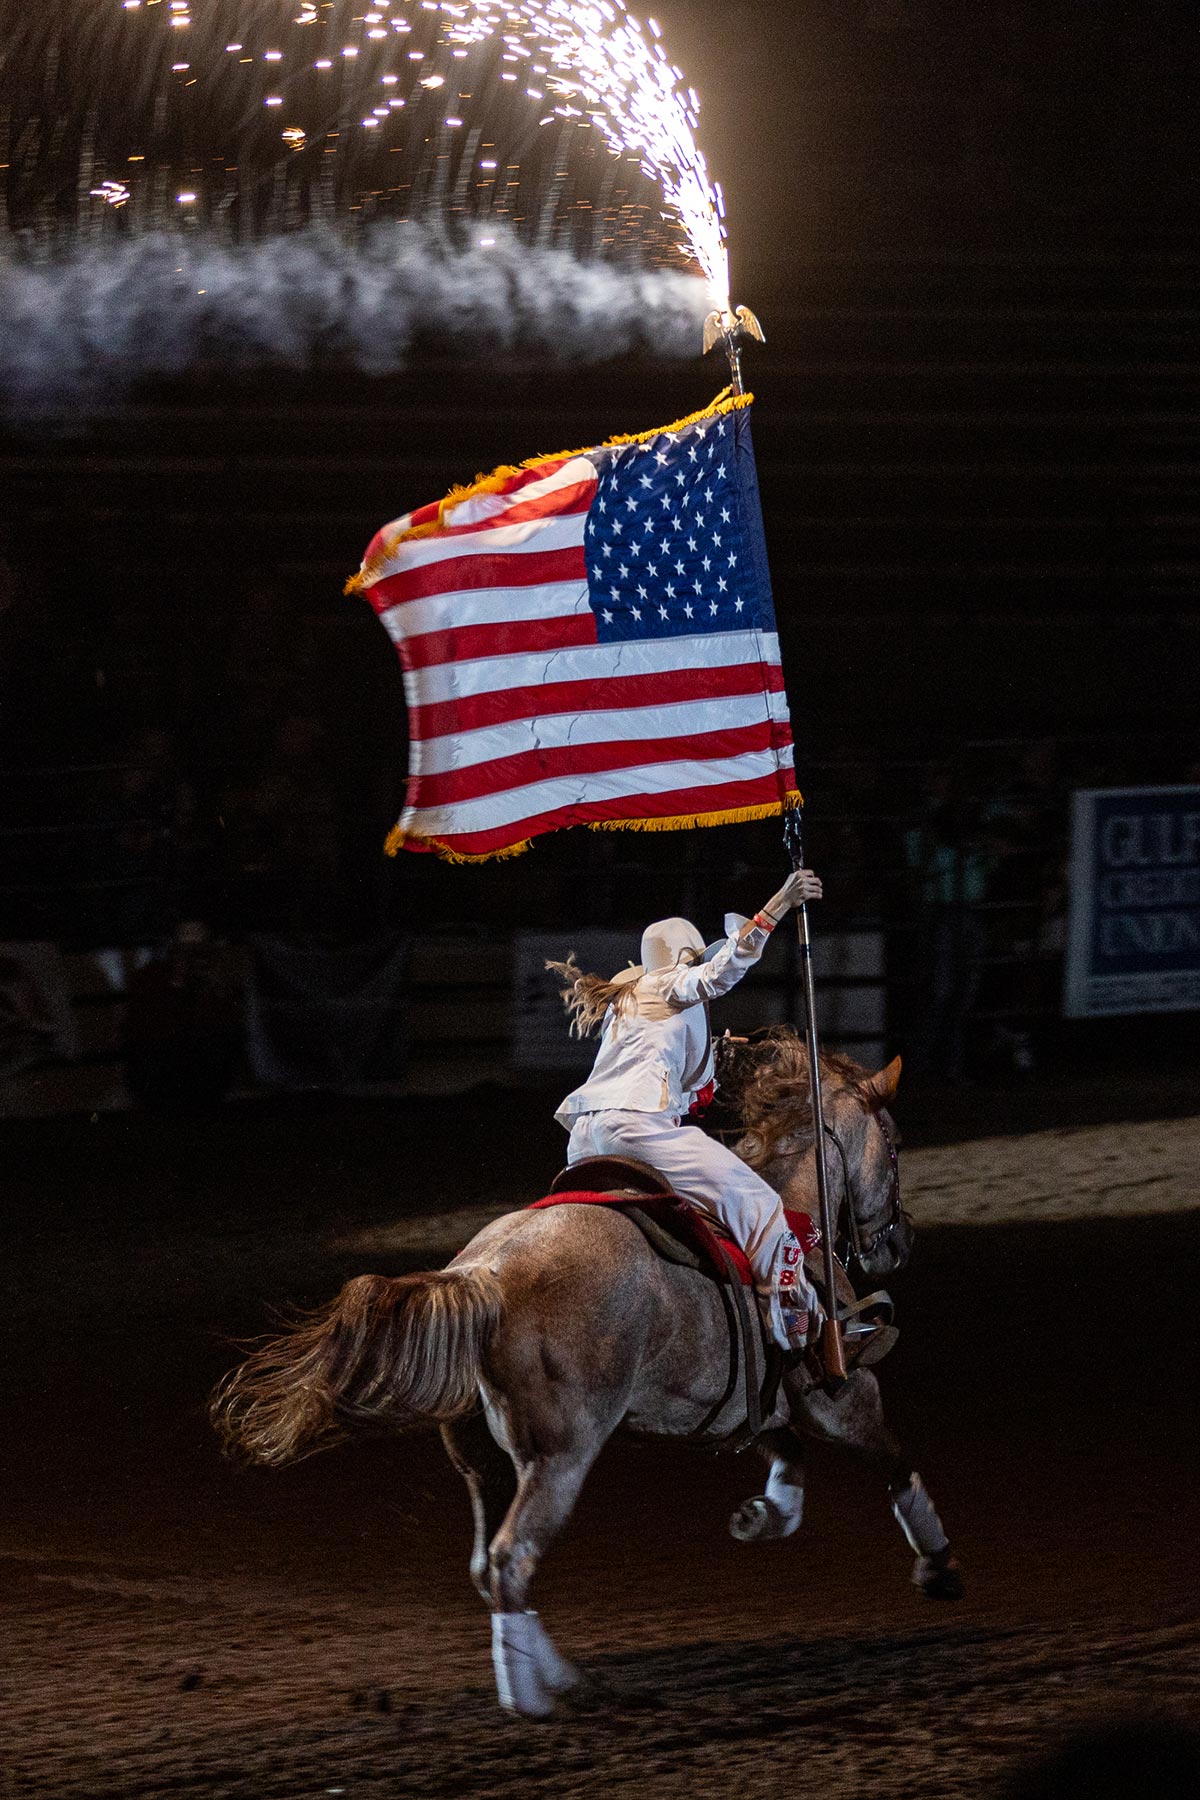 A woman rides off on a horse holding a U.S. flag with sparkles before the South Texas State Fair Rodeo, Beaumont, Texas, March 23. UP photo by Brian Quijada.